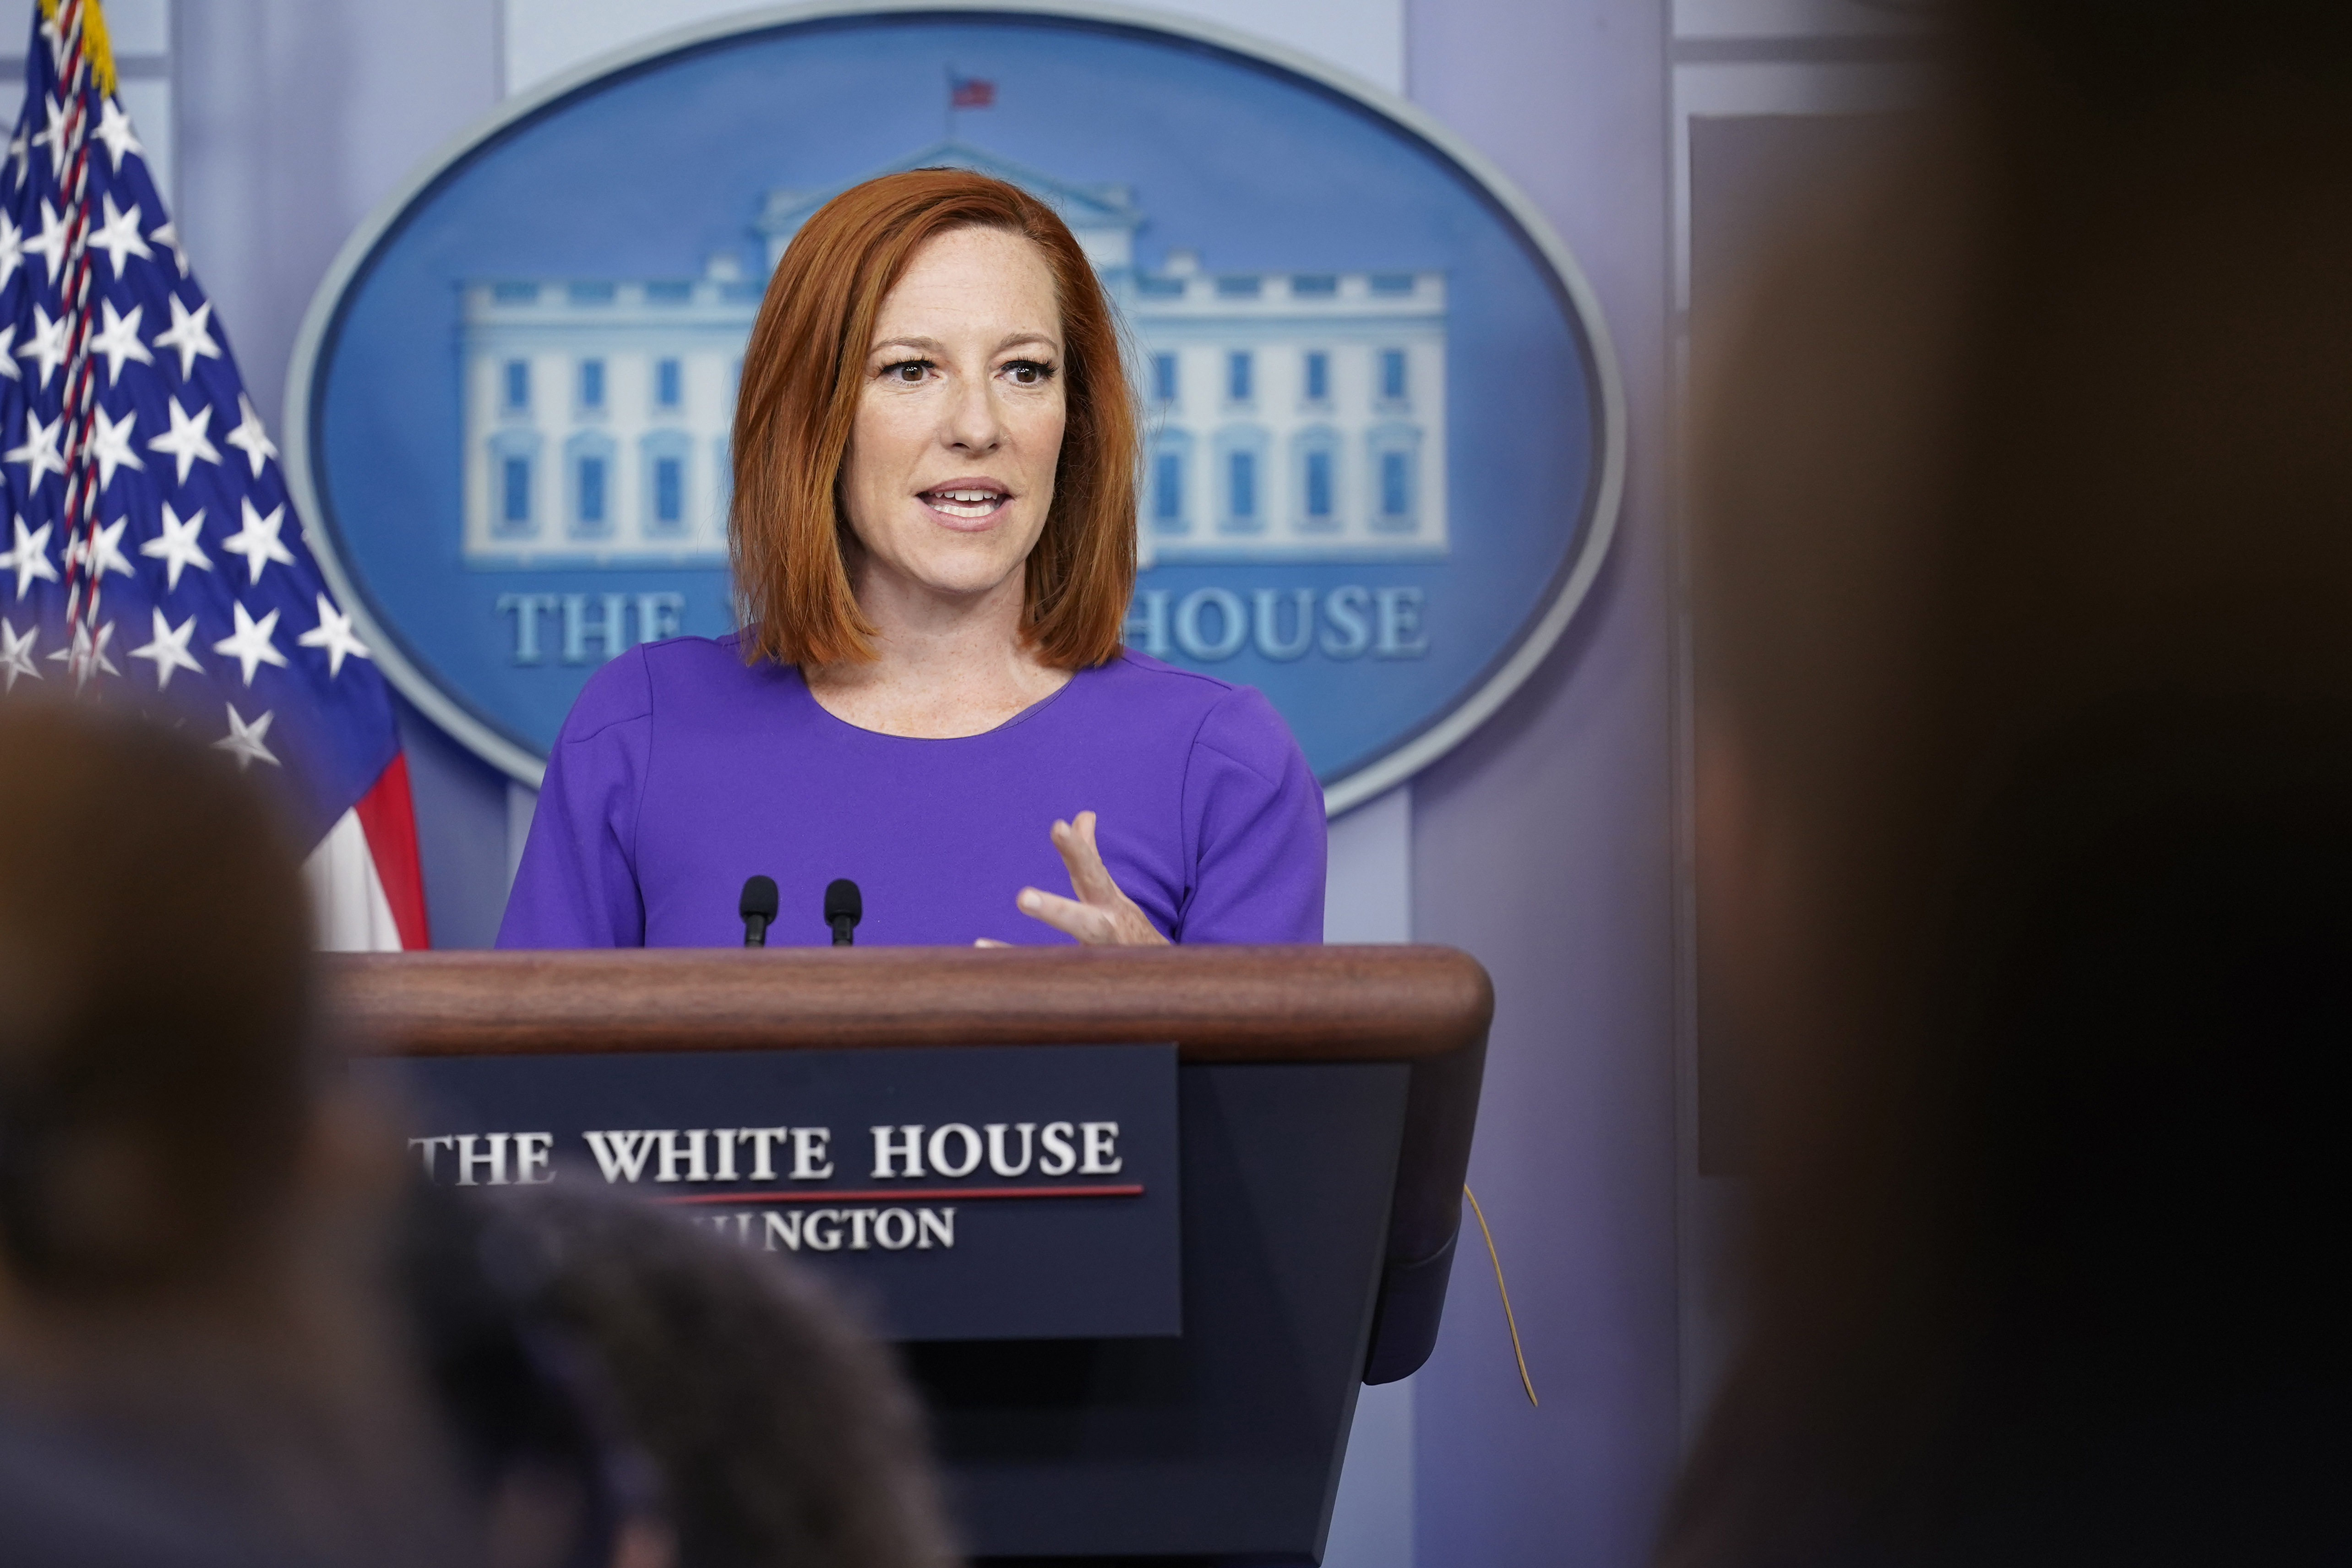 White House press secretary Jen Psaki speaks during the daily briefing at the White House in Washington, on Friday, June 25.